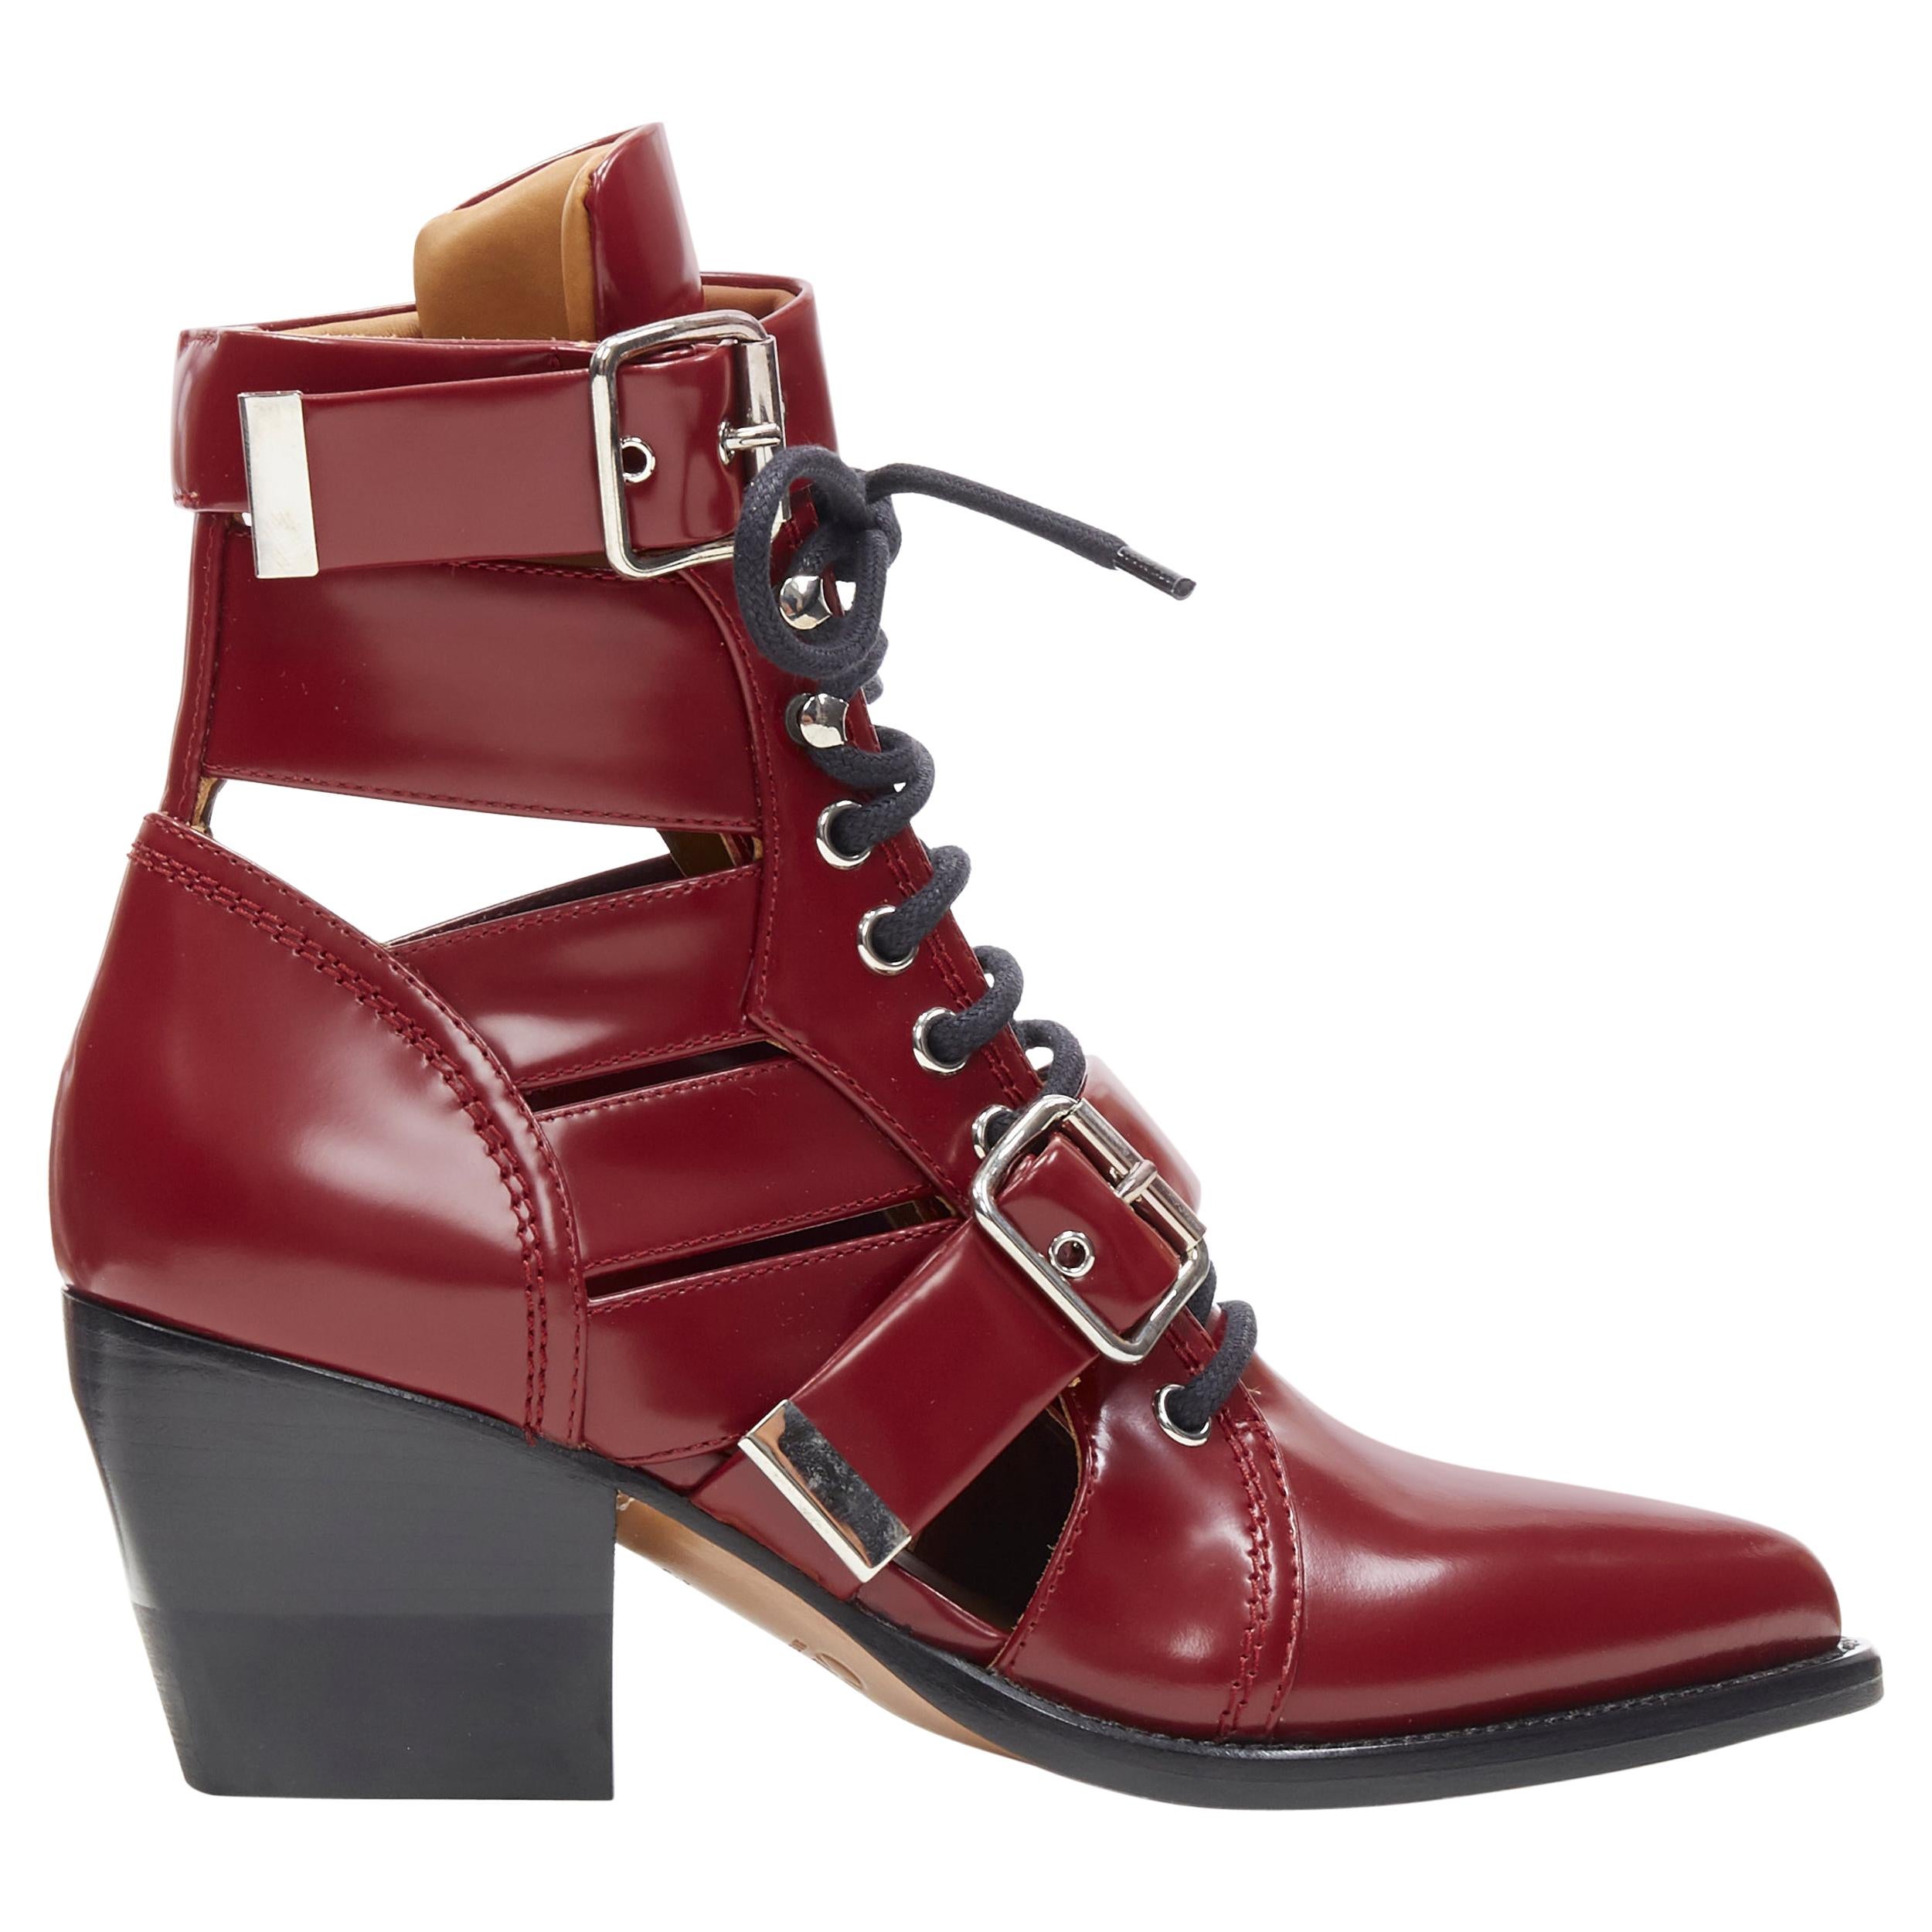 new CHLOE Rylee burgundy red leather cut out buckled pointy ankle boot EU38